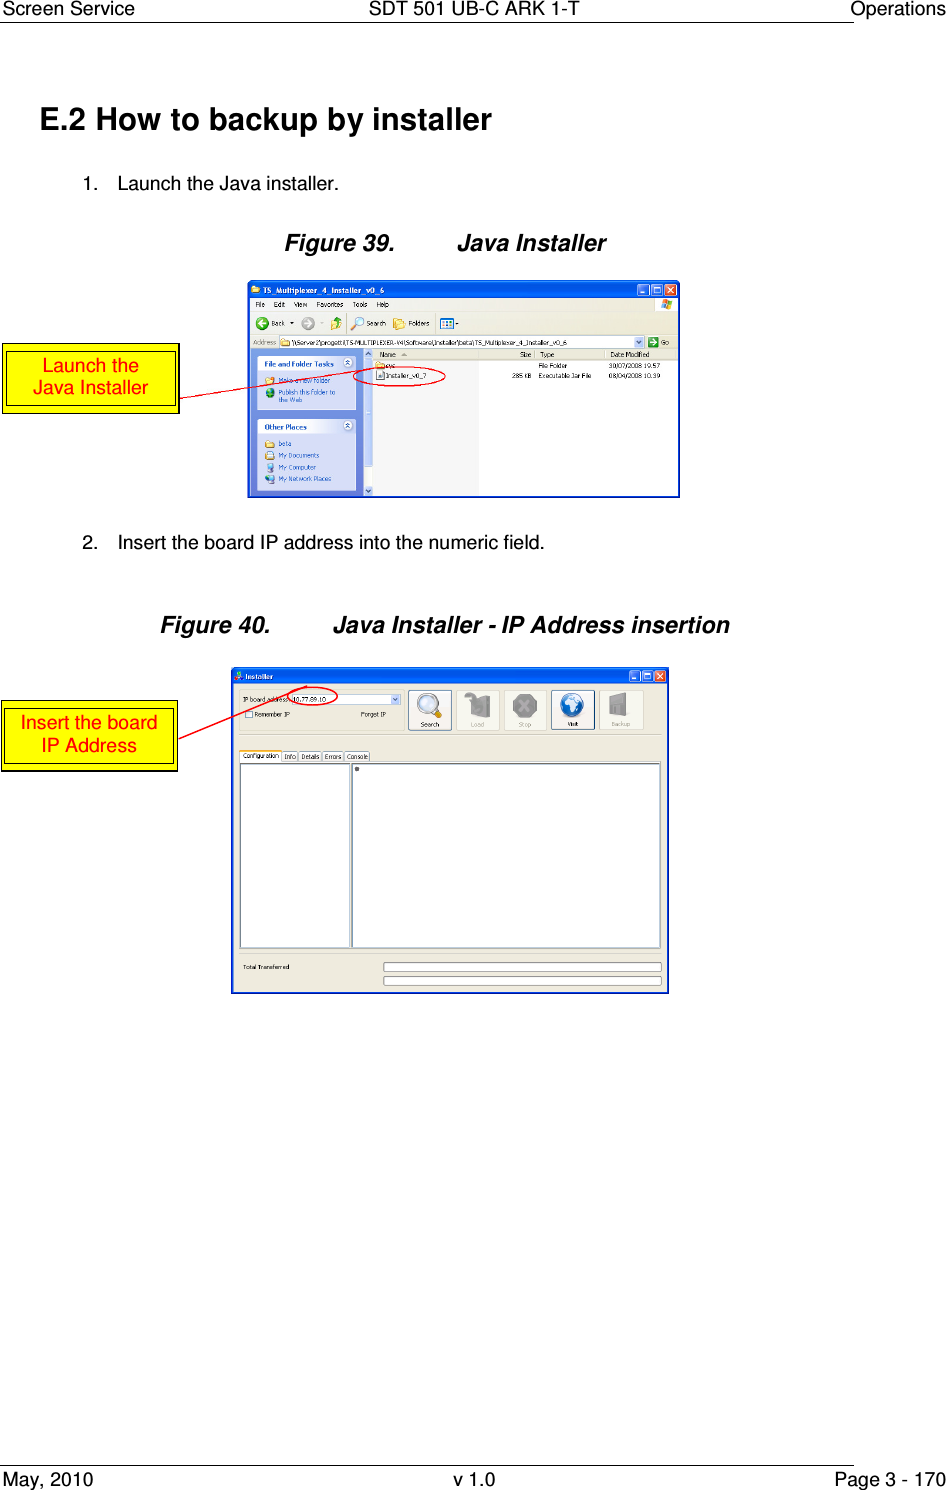 Screen Service  SDT 501 UB-C ARK 1-T  Operations May, 2010  v 1.0  Page 3 - 170 E.2 How to backup by installer 1.  Launch the Java installer. Figure 39.  Java Installer  2.  Insert the board IP address into the numeric field.  Figure 40.  Java Installer - IP Address insertion                  Insert the board IP Address Launch the Java Installer 